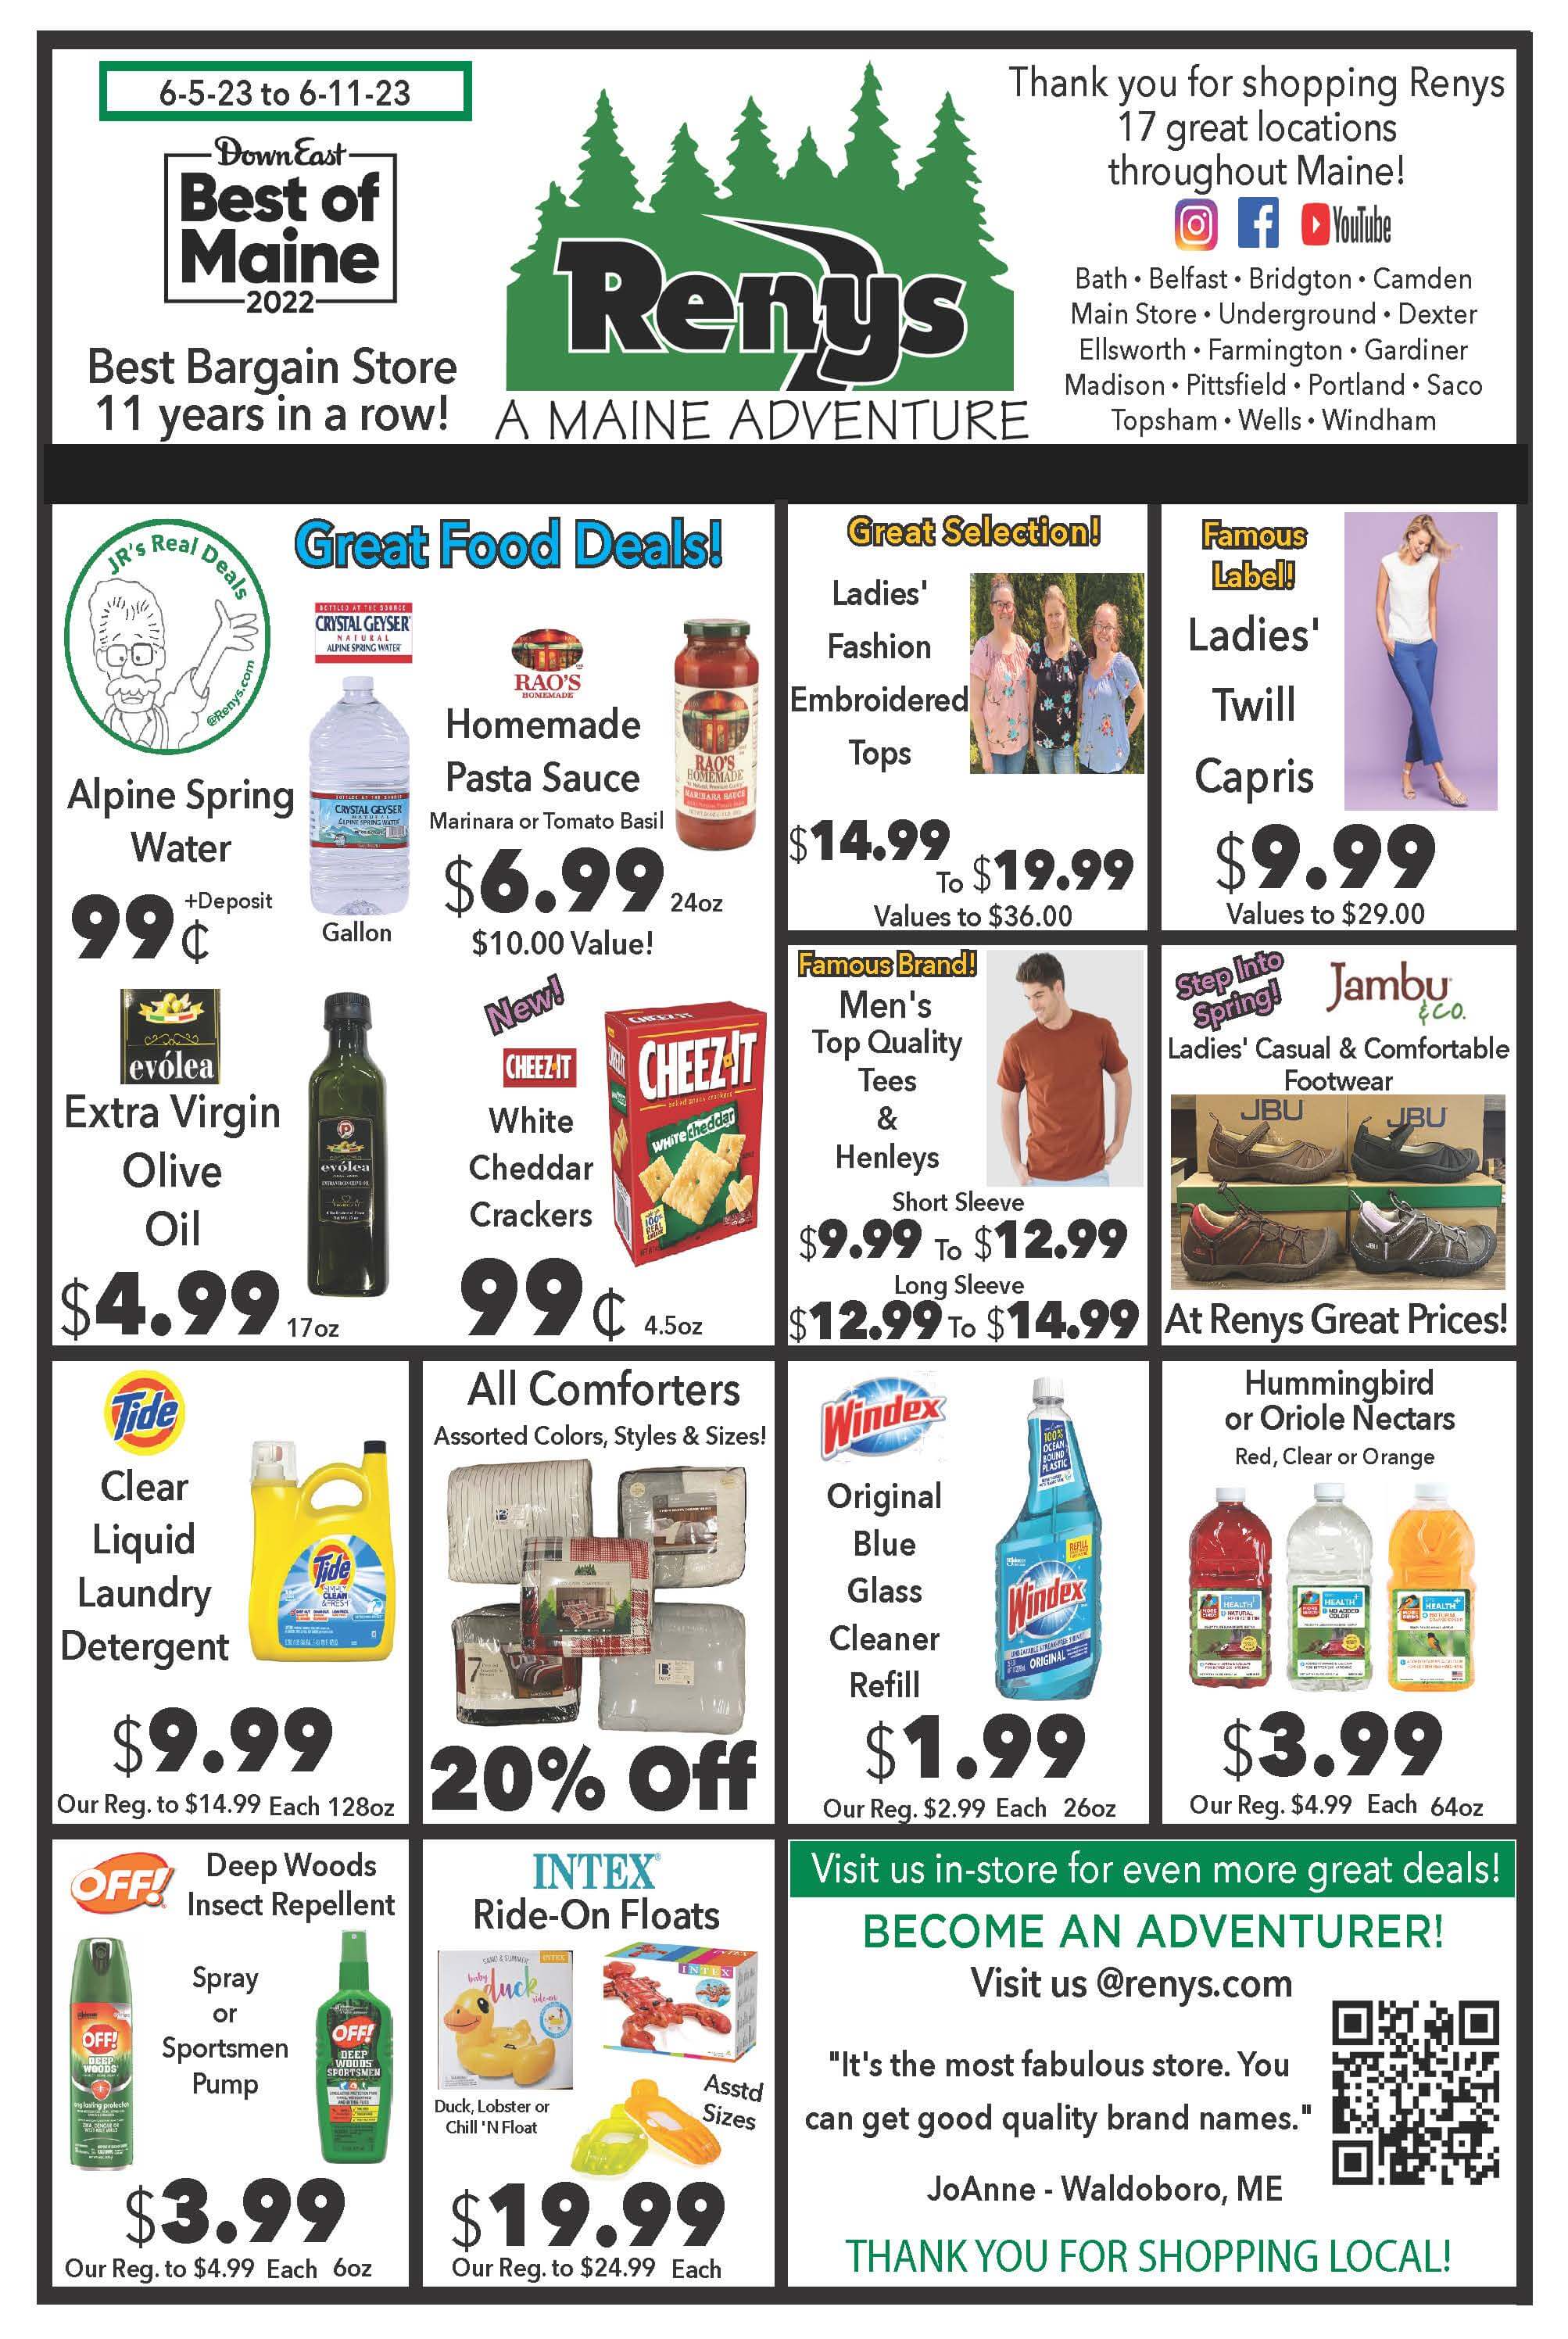 6/5/23 - 6/11/23 Weekly Flyer